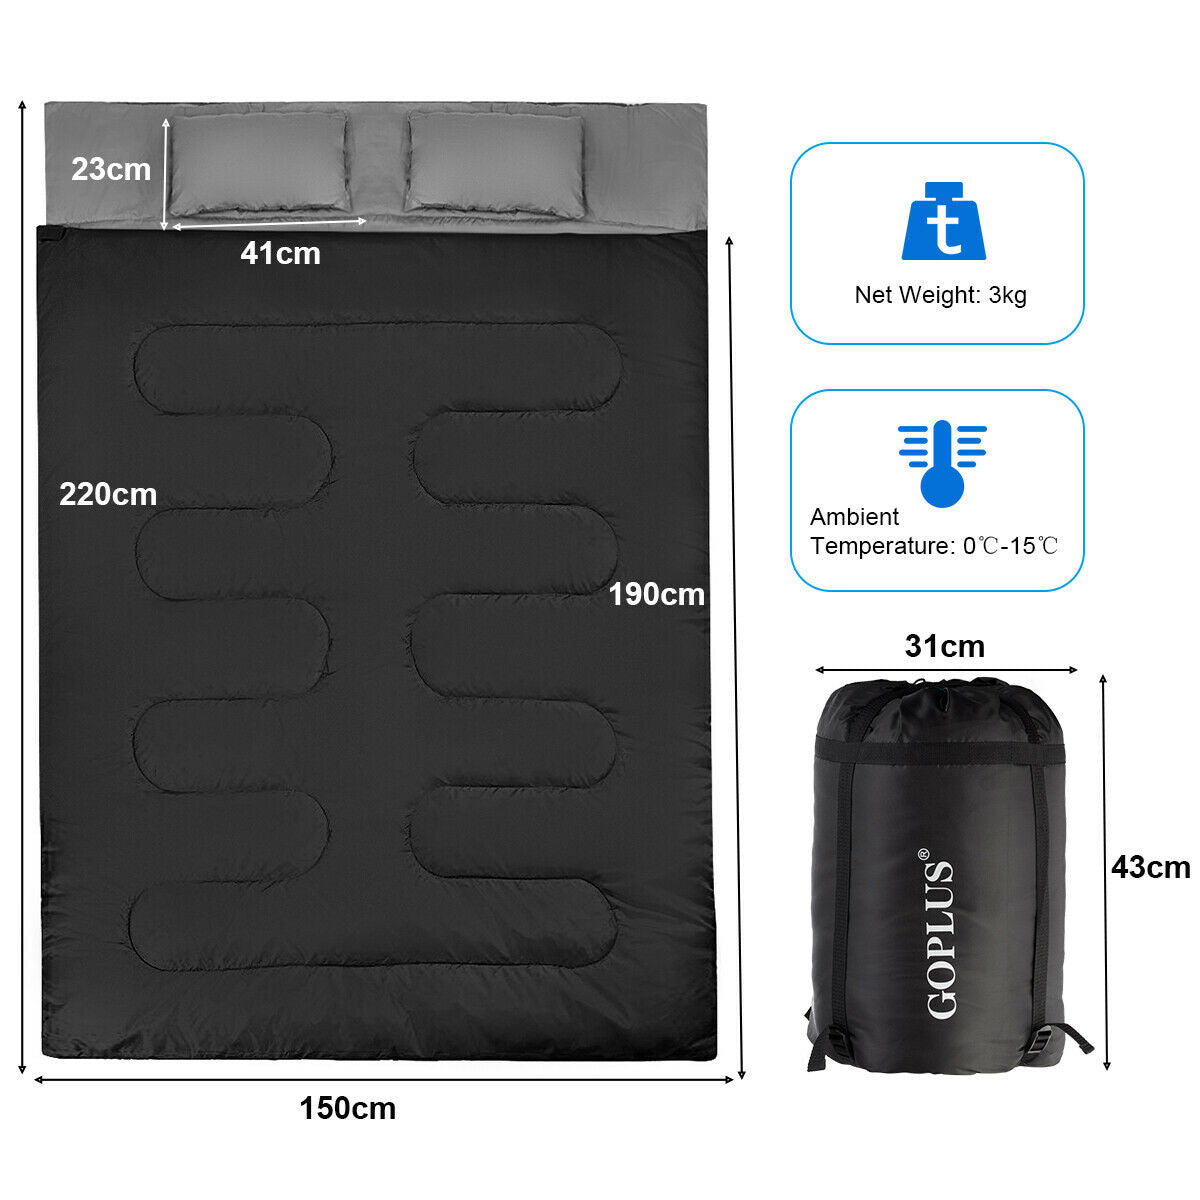 Double Sleeping Bag Extra Large Waterproof with Carrying Bag-Black